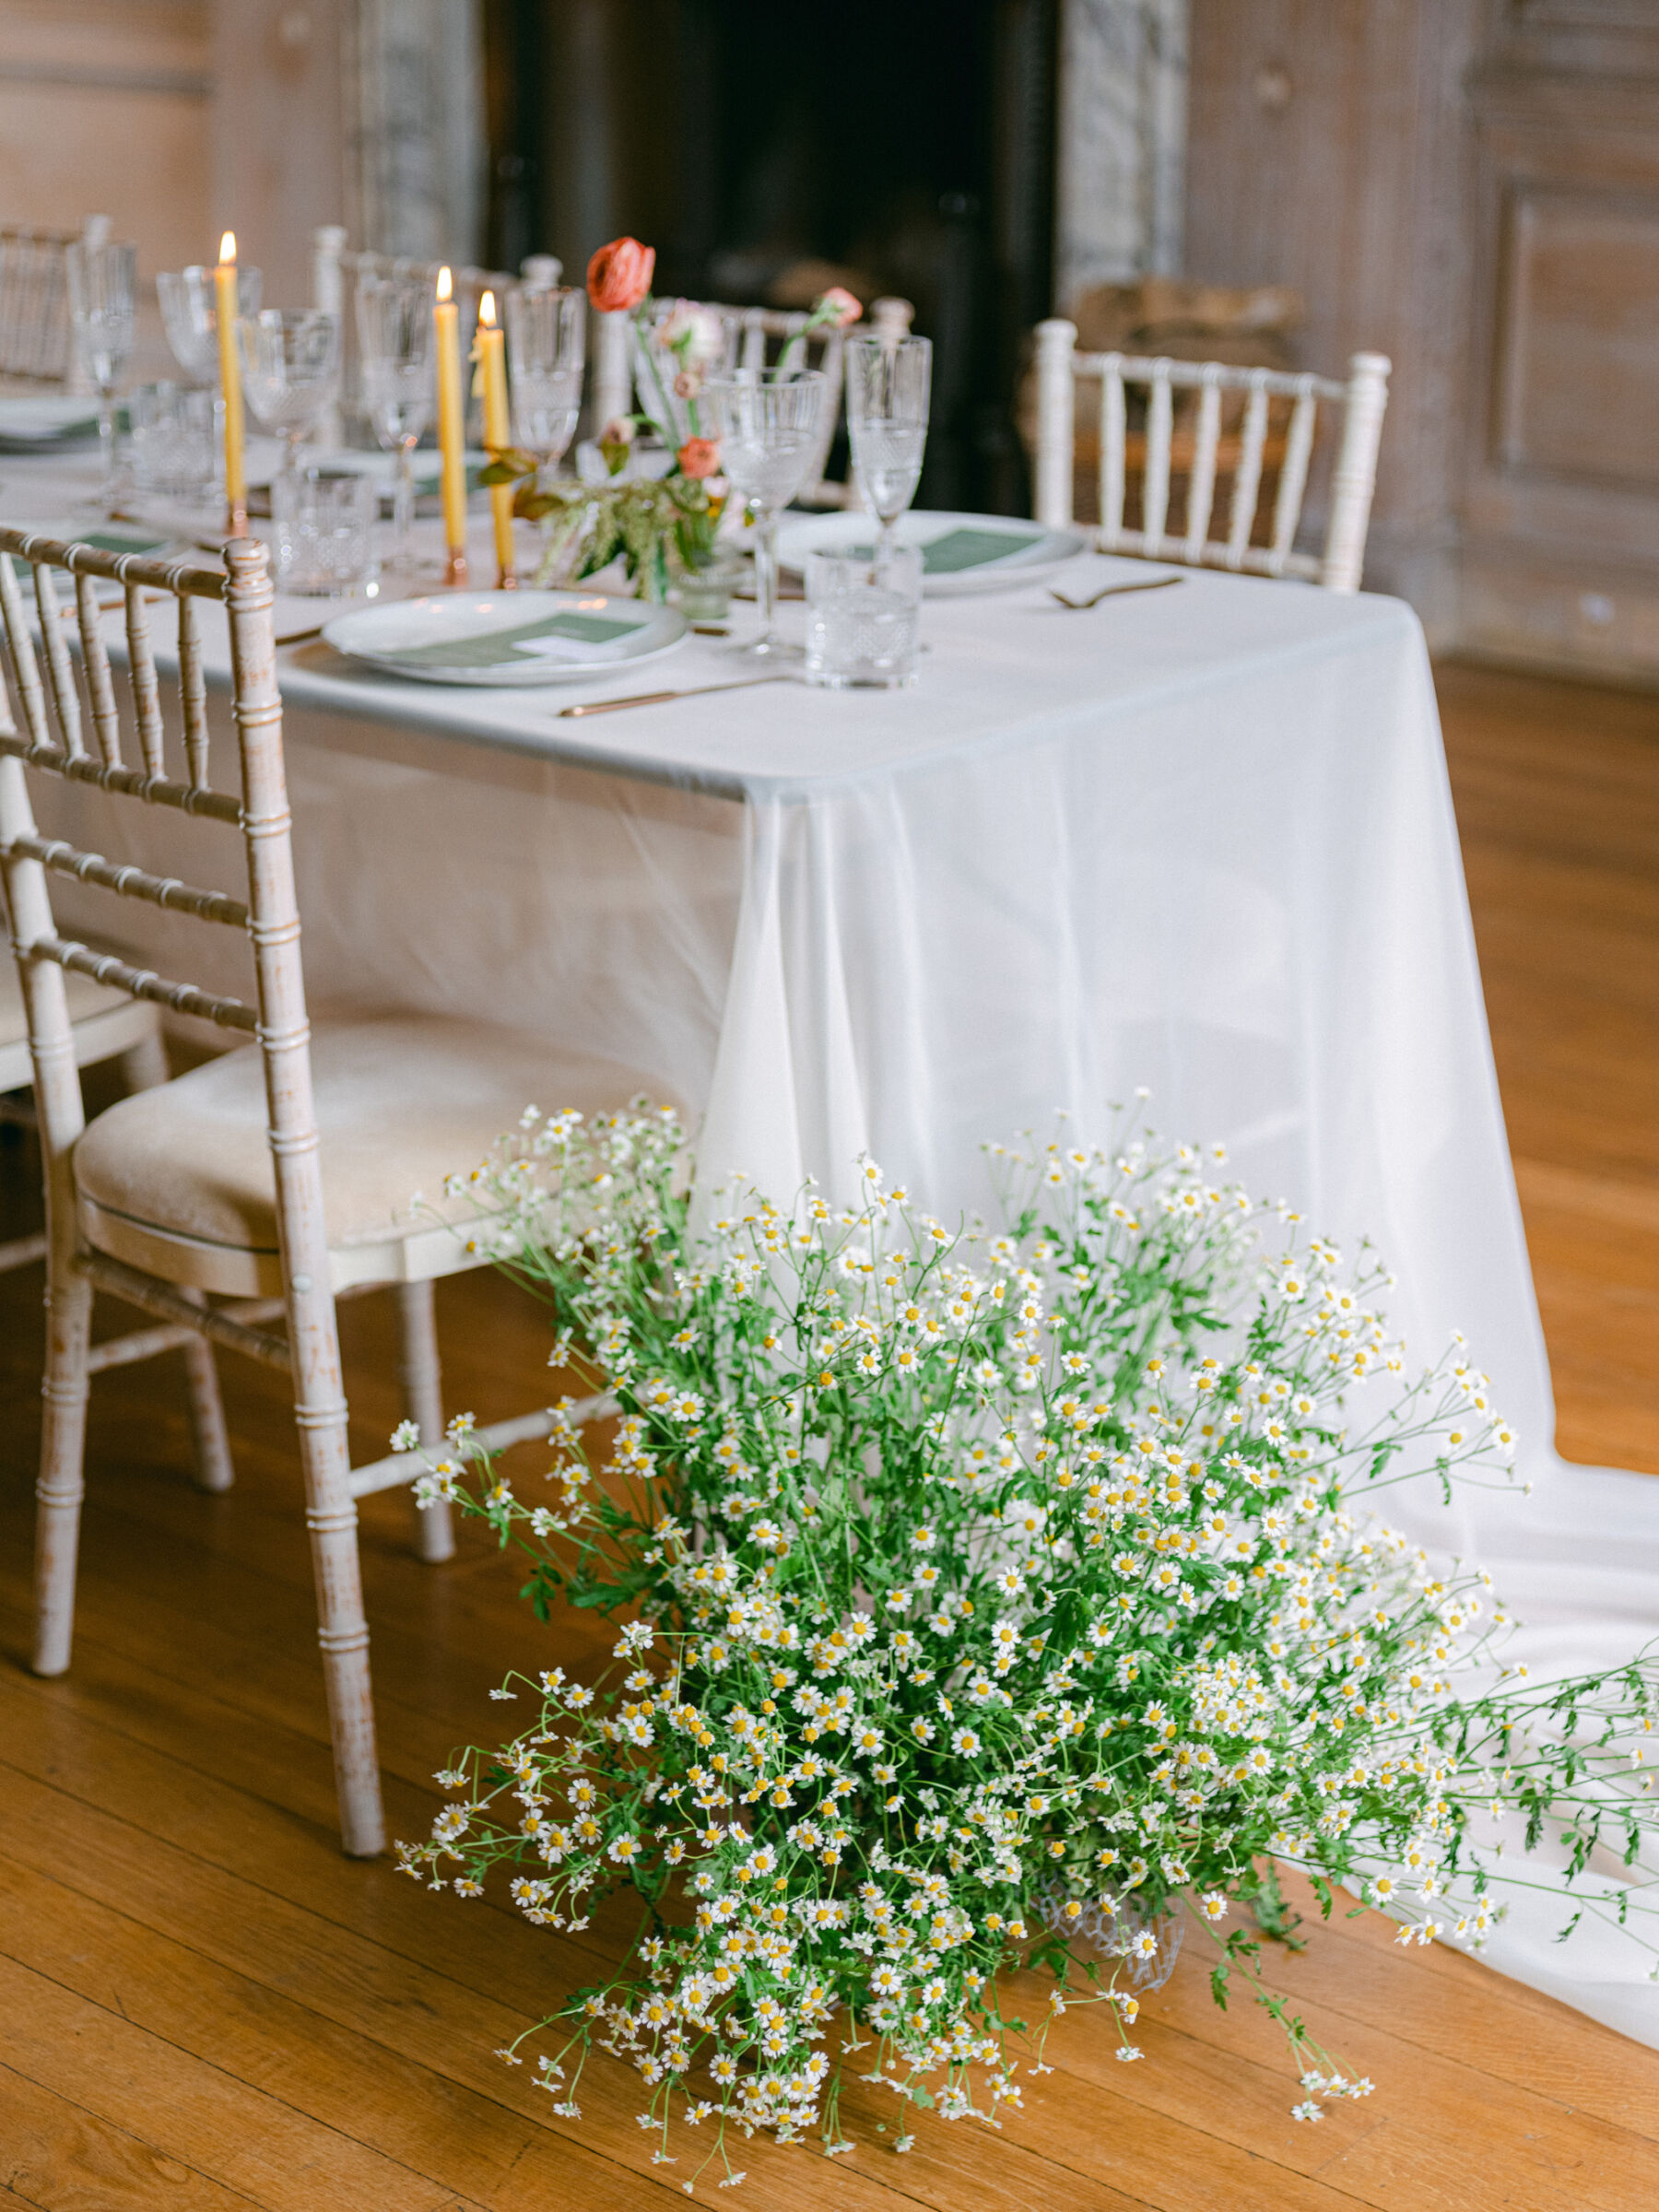 Floral decor at the foot of a wedding table. Chamomile daisies.